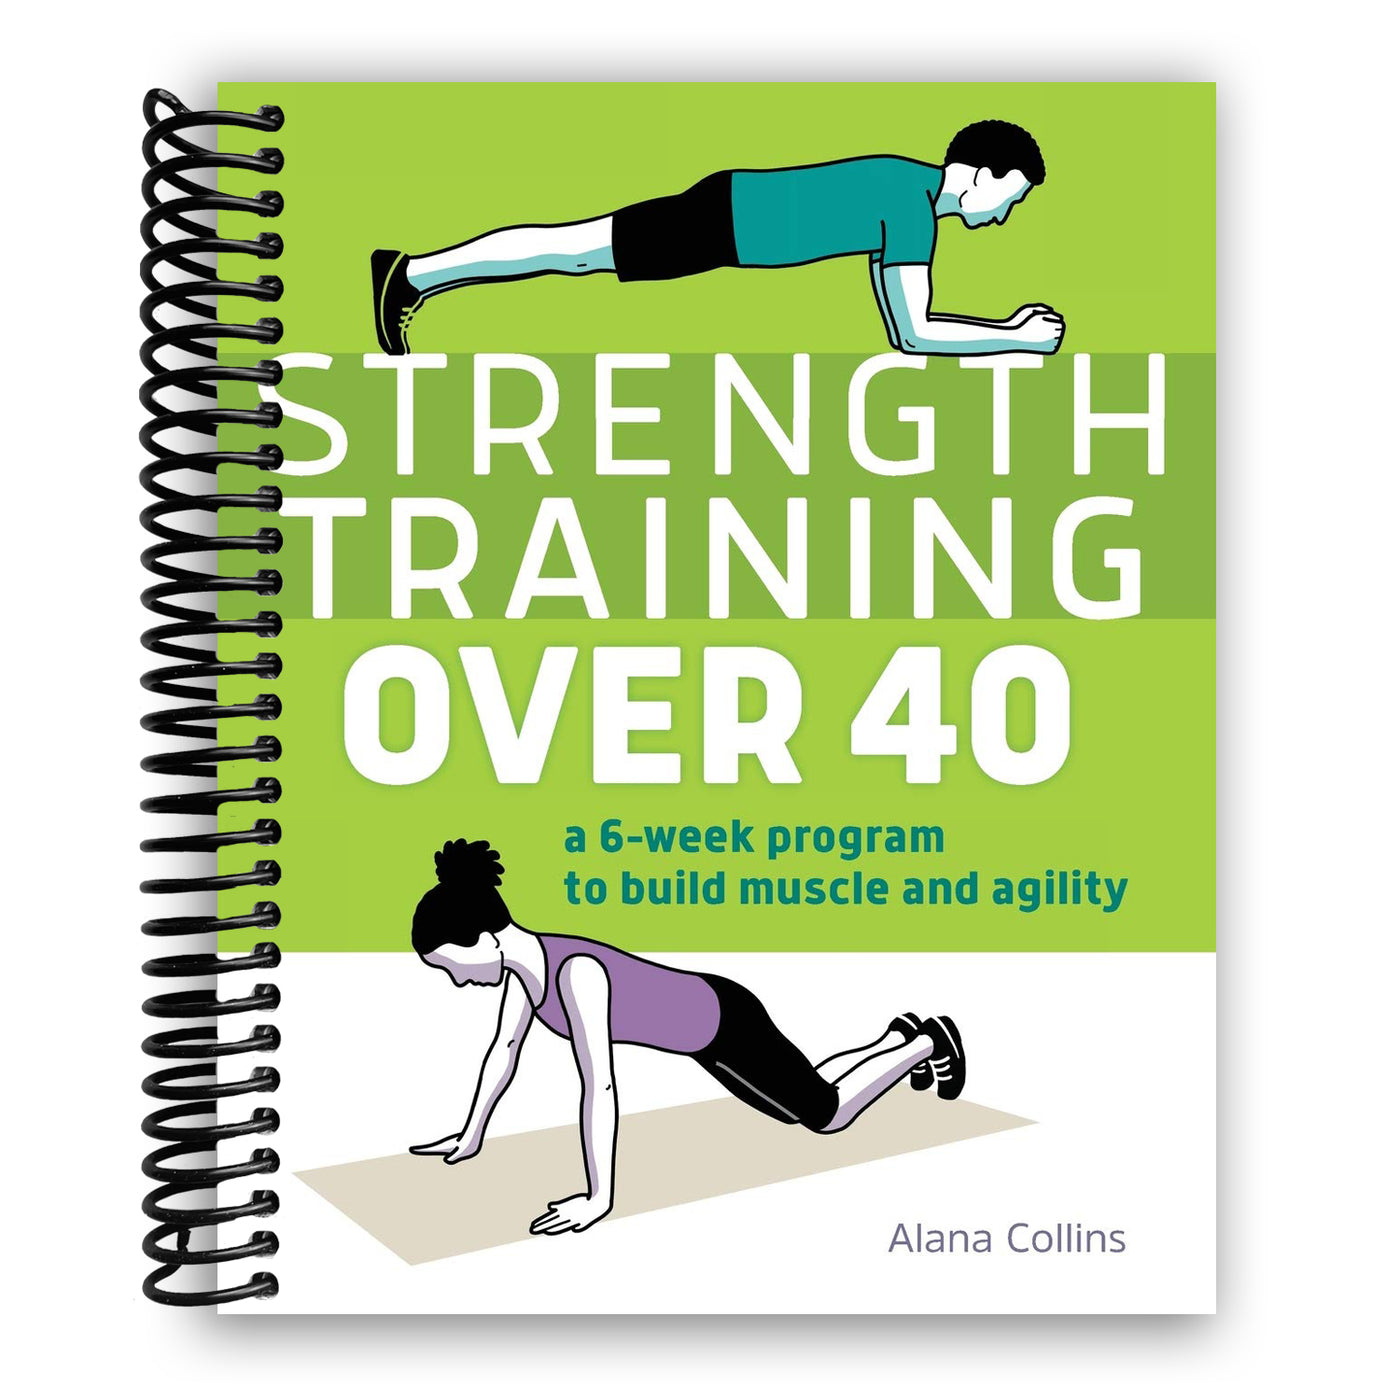 Strength Training Over 40: A 6-Week Program to Build Muscle and